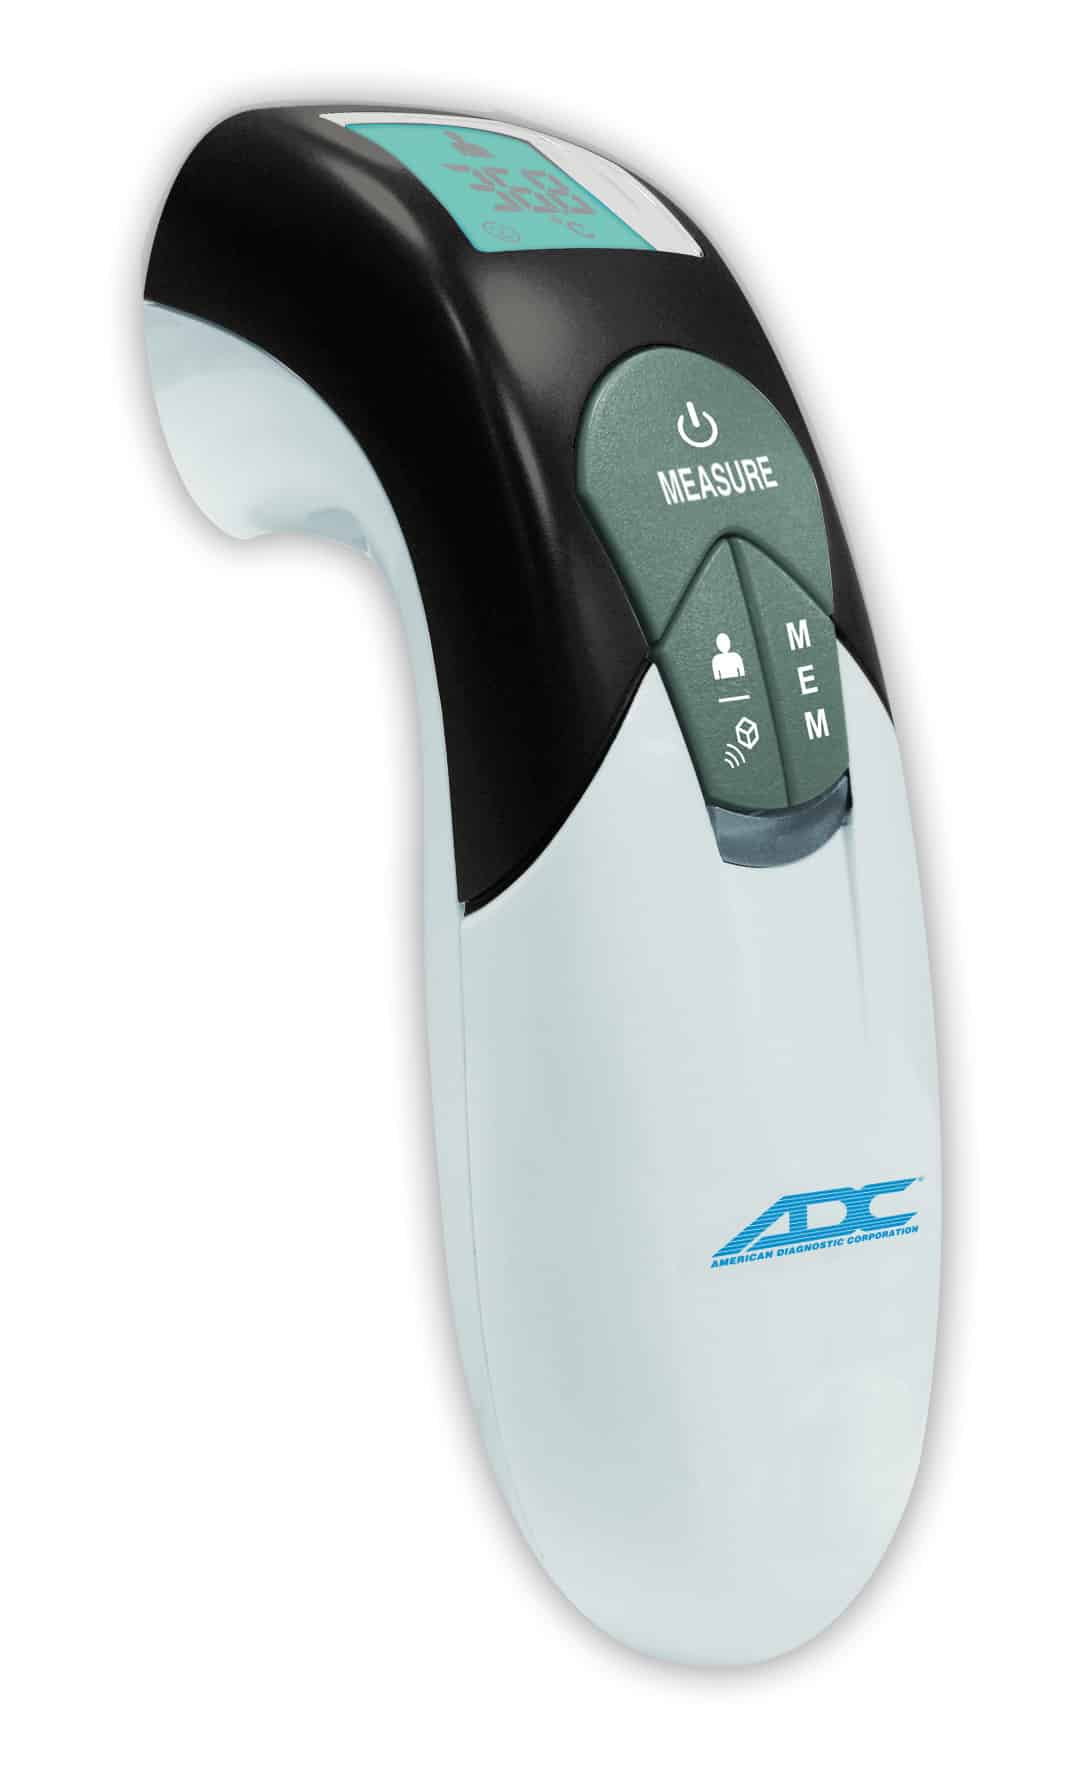 ADC Adtemp 433 Non-Contact Infrared Thermometer Digital Temperature Gun  White 2 Seconds 2 Years Warranty - Doctor Essentials